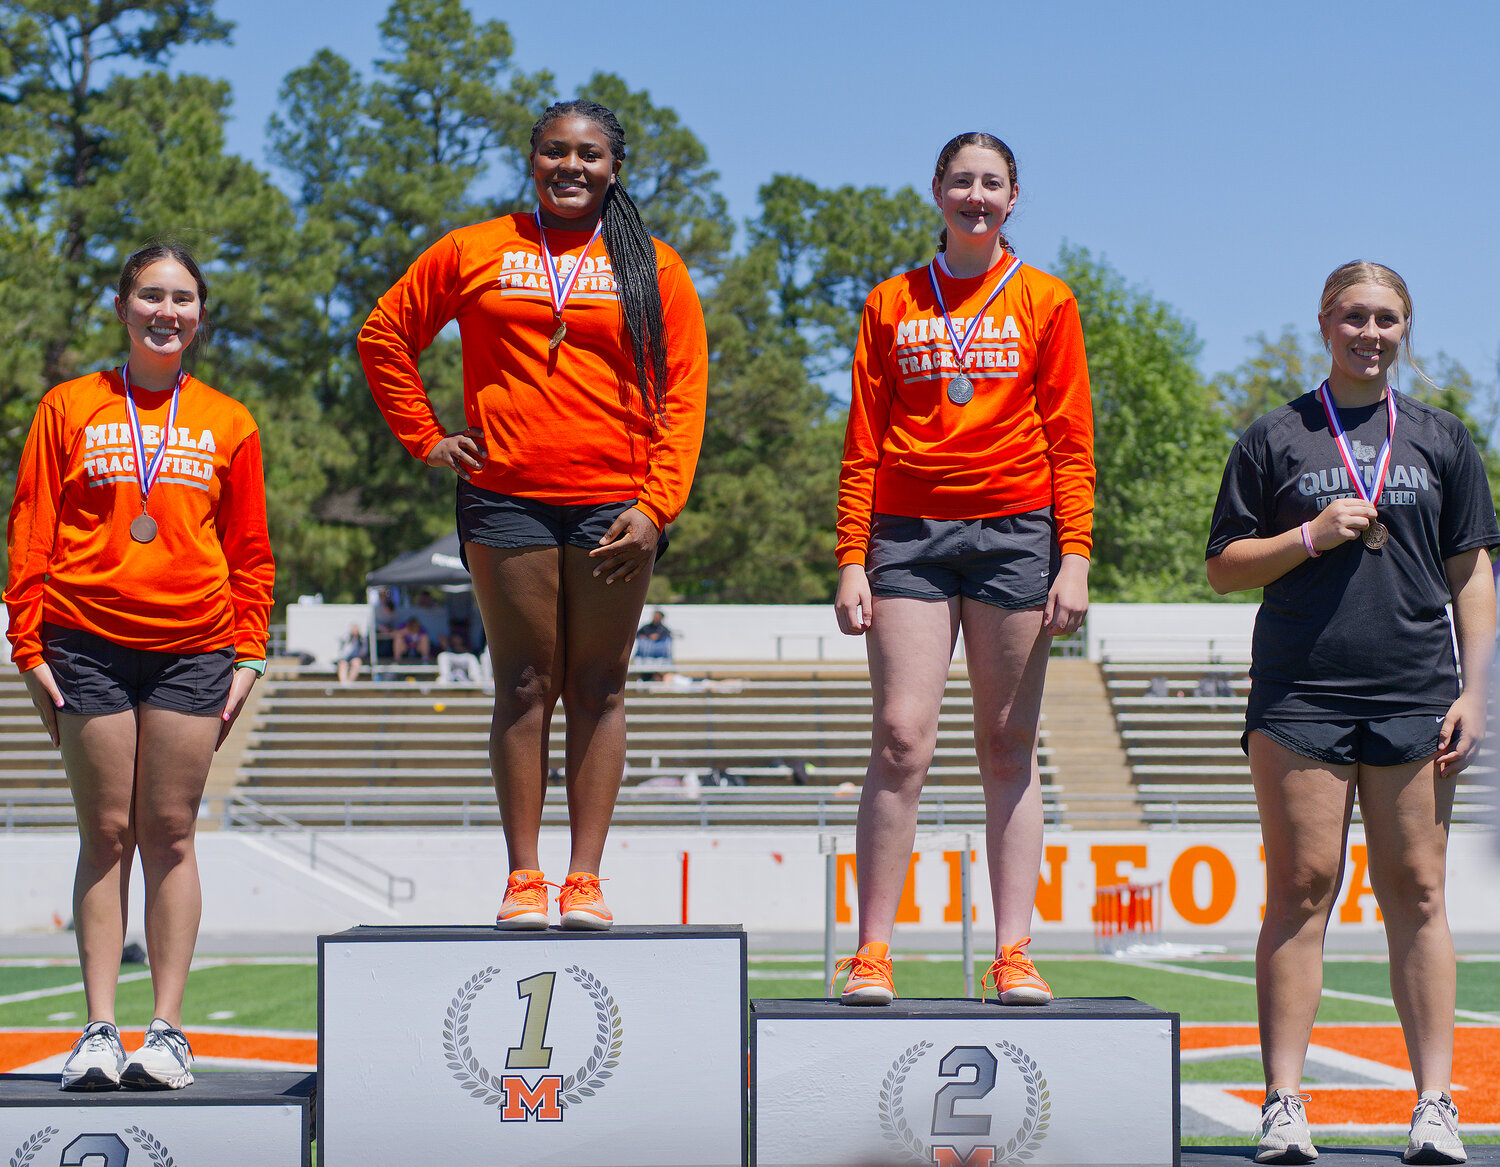 Left to right, Makena Quiambao, Zion Olajide, Callie Black and Annabelle Popek show off their newly acquired hardware. Olajide, Black and Quiambao swept the top three spots in the discus. Olajide threw 91 feet, with both of her teammates challenging that throw. Quitman's Popek claimed the fourth spot and an area meet berth. [see more speed and strength on display]